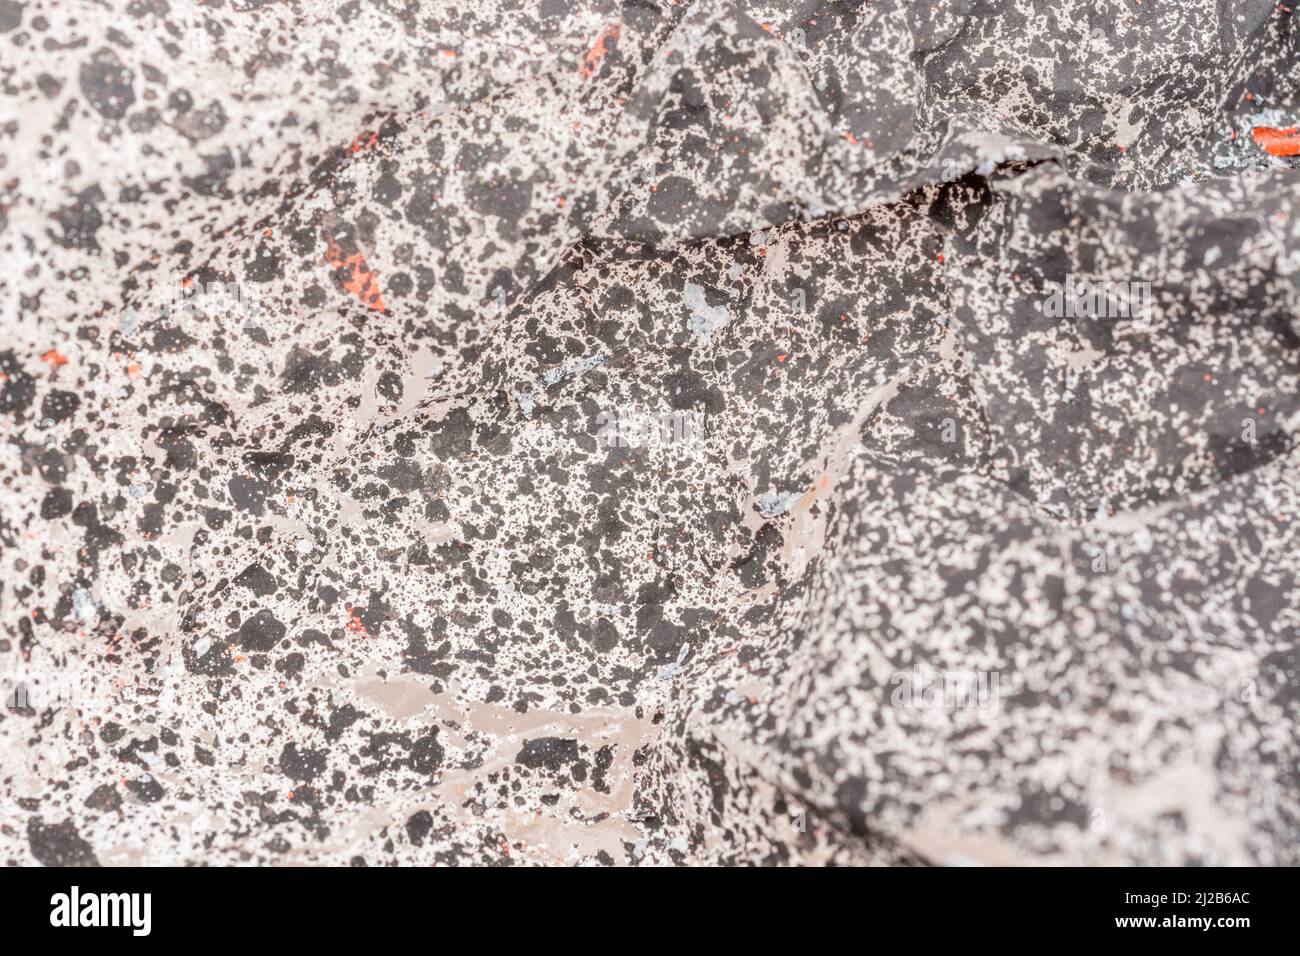 Close-up texture of paint covered plastic dust sheet covered by flaking paint spray. For peeling paint, making a mess of things. Stock Photo